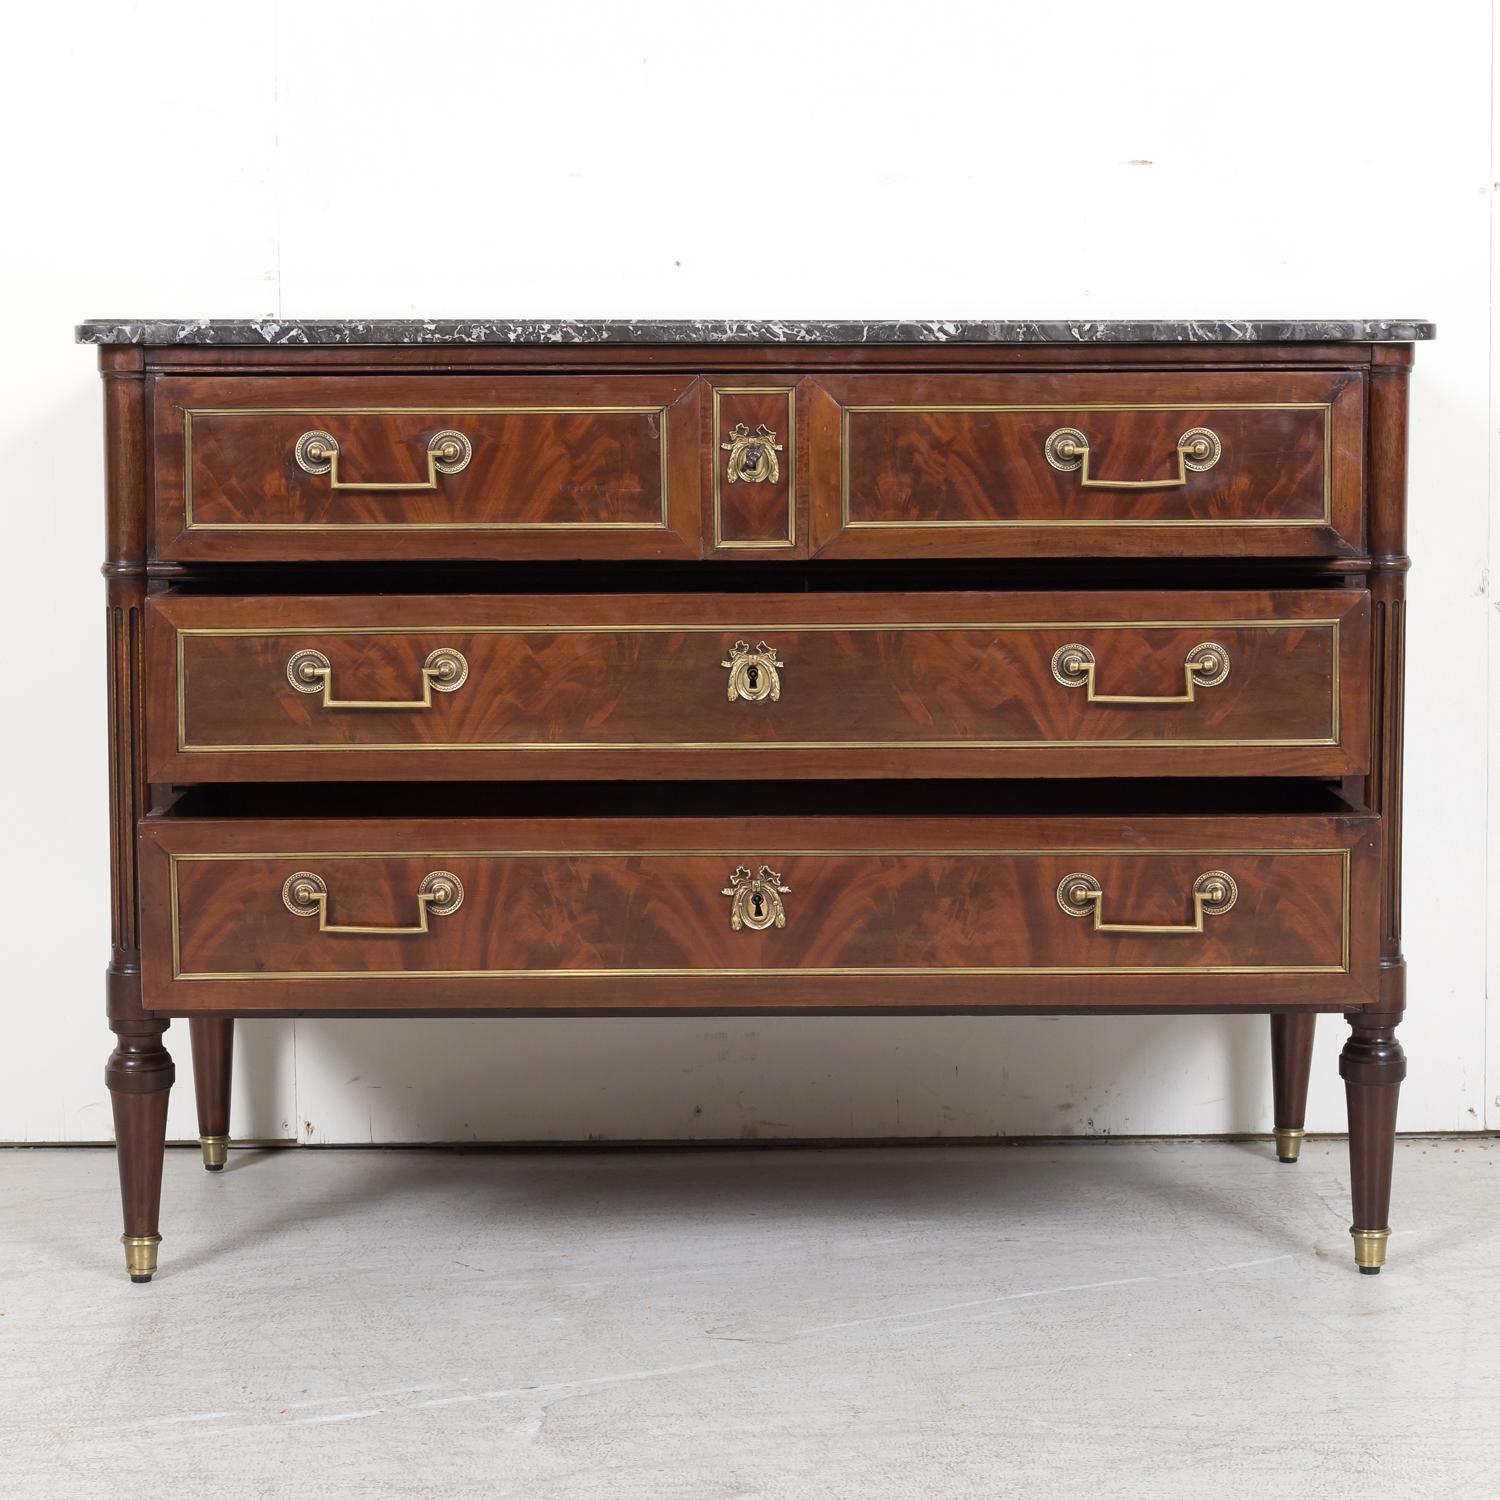 18th Century French Louis XVI Period Mahogany Commode with Saint Anne Marble Top For Sale 1